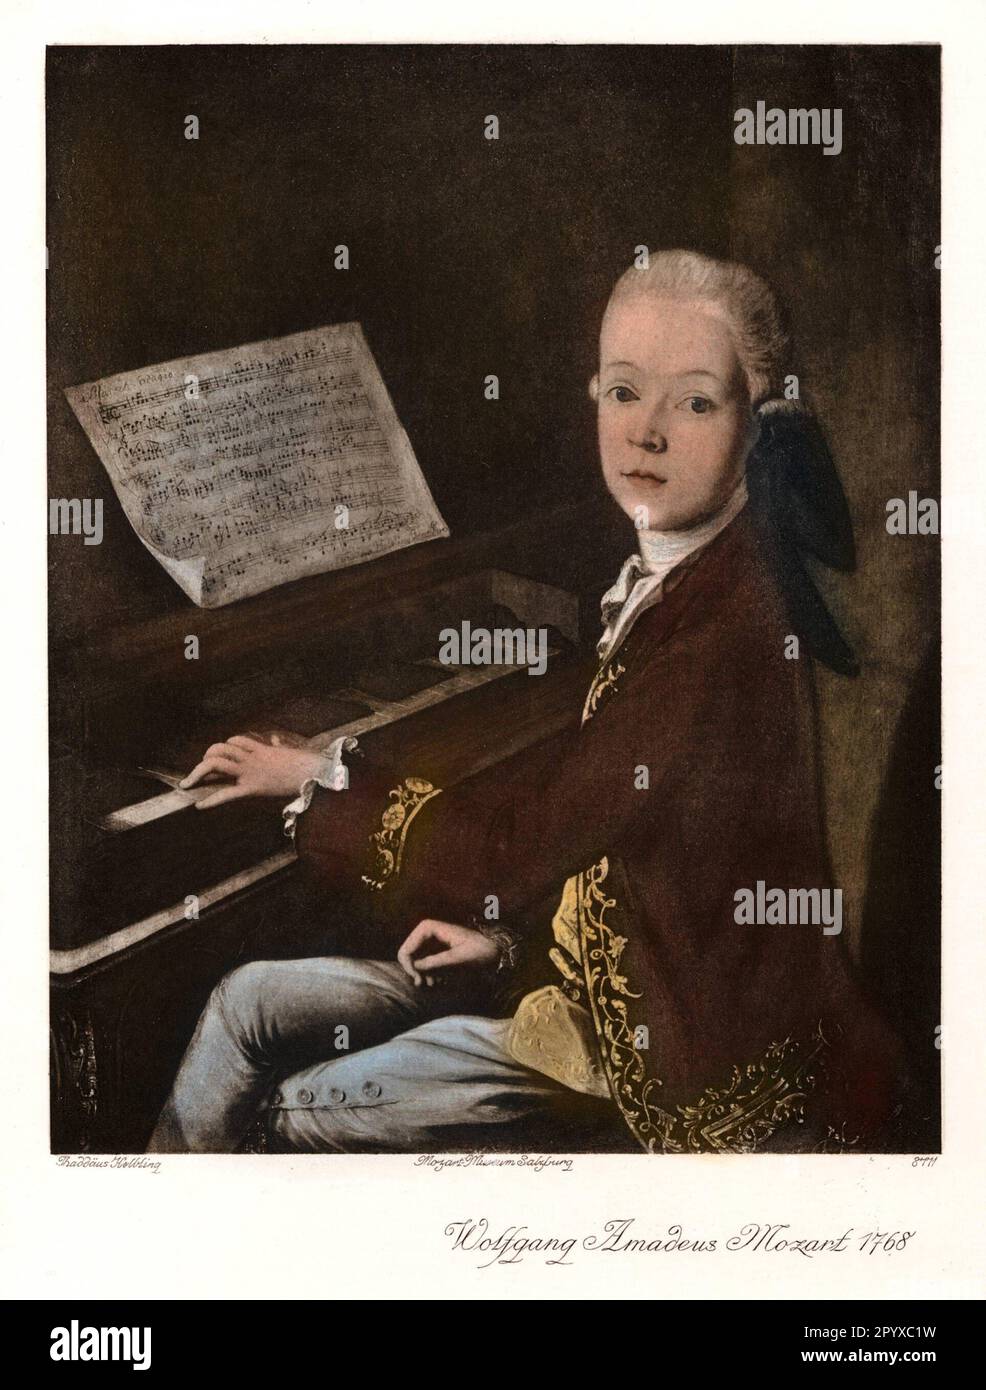 Wolfgang Amadeus Mozart (1756-1791), Austrian composer. The painting shows him at the age of 12. However, the identification is disputed - possibly the Salzburg nobleman Karl Max von Firmian is depicted. Painting by Thaddäus Helbling. Photo: Heliogravure, Corpus Imaginum, Hanfstaengl Collection. [automated translation] Stock Photo